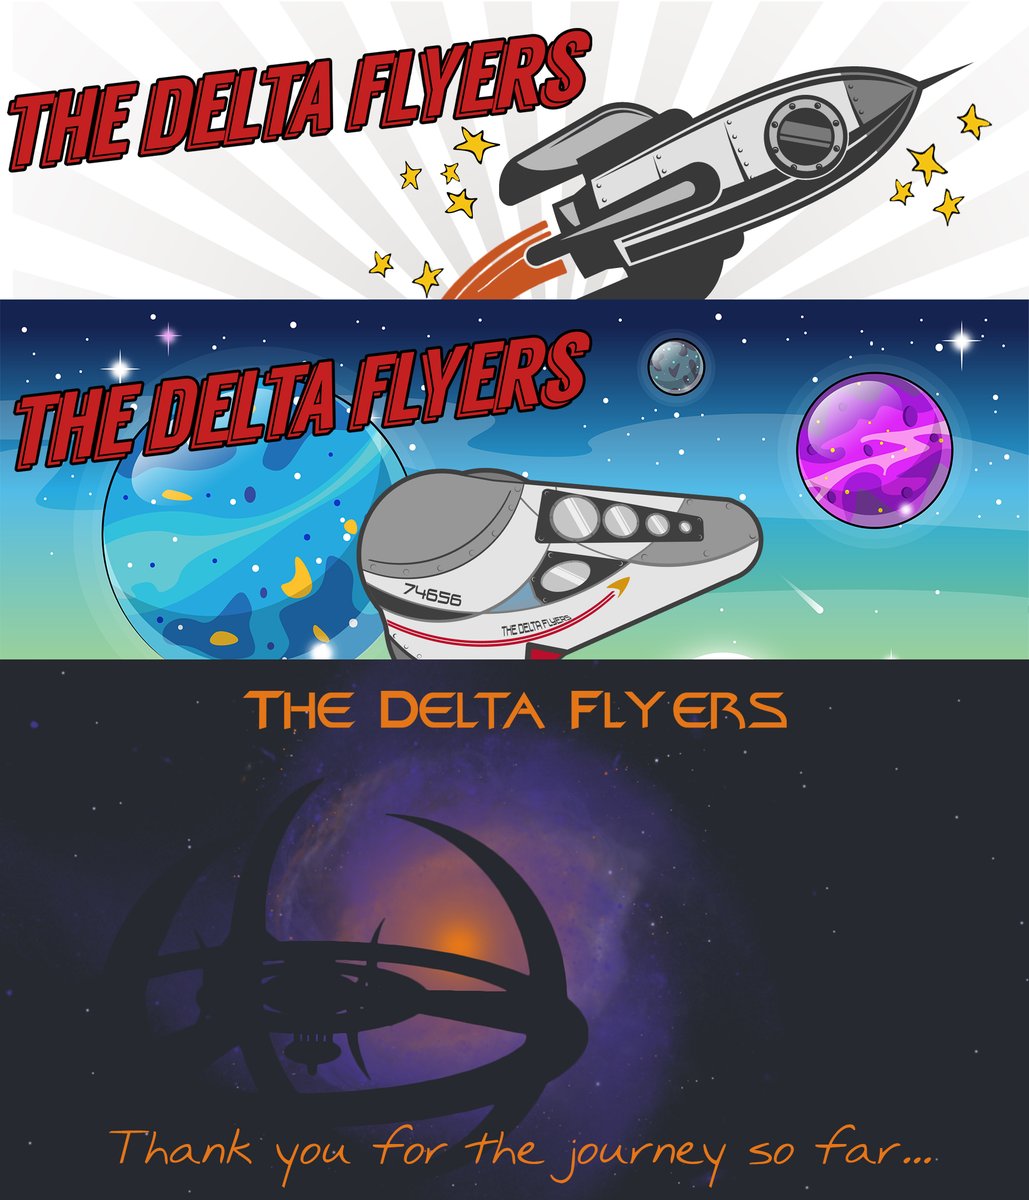 4 yrs ago we launched The Delta Flyers. We had no idea where it would take us, but the journey has been one we could not have imagined. It's all thanks to you, our listeners and supporters. Thank you for joining us, we're excited to see where it will take us in the next 4 yrs!